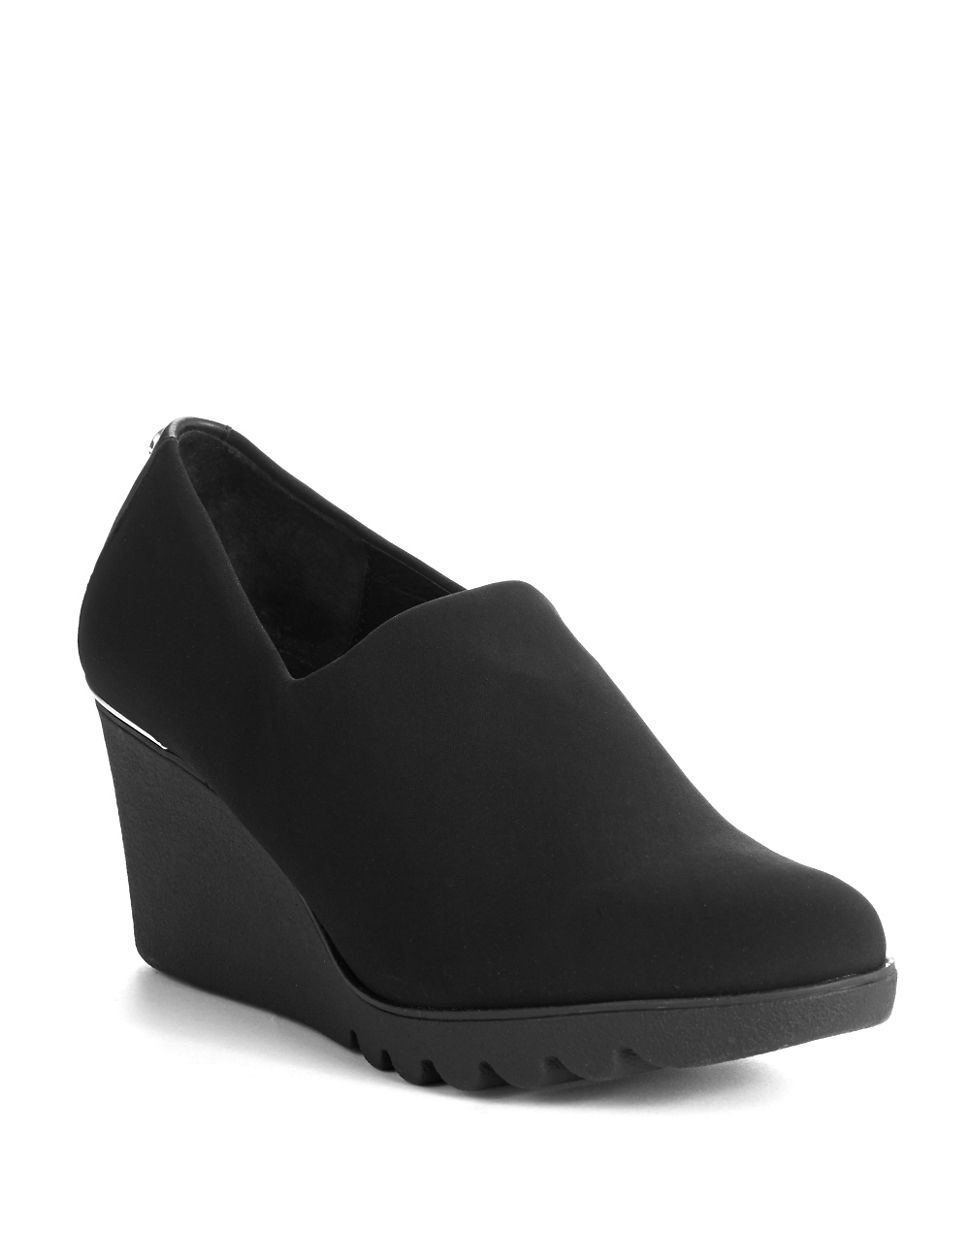 Lyst - Donald J Pliner Maddy Wedge Shoes in Black